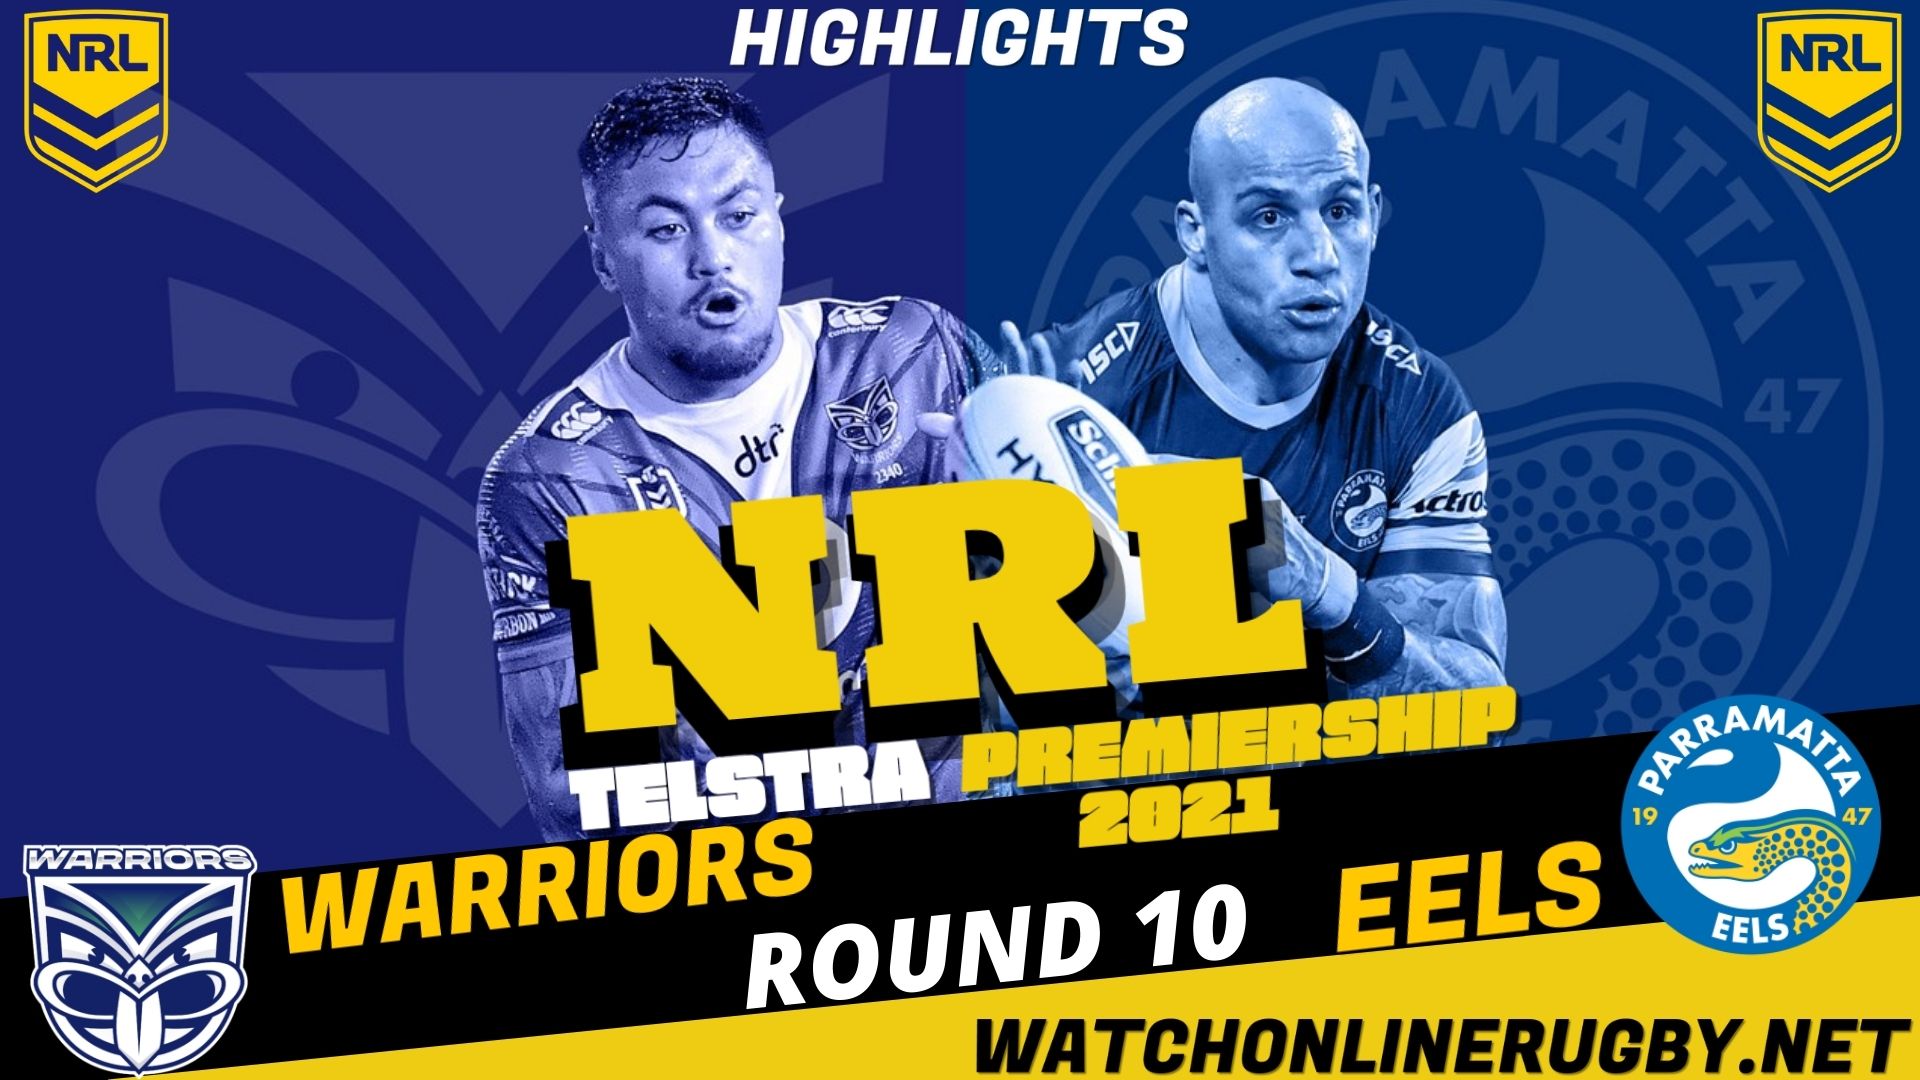 Warriors Vs Eels Highlights RD 10 NRL Rugby